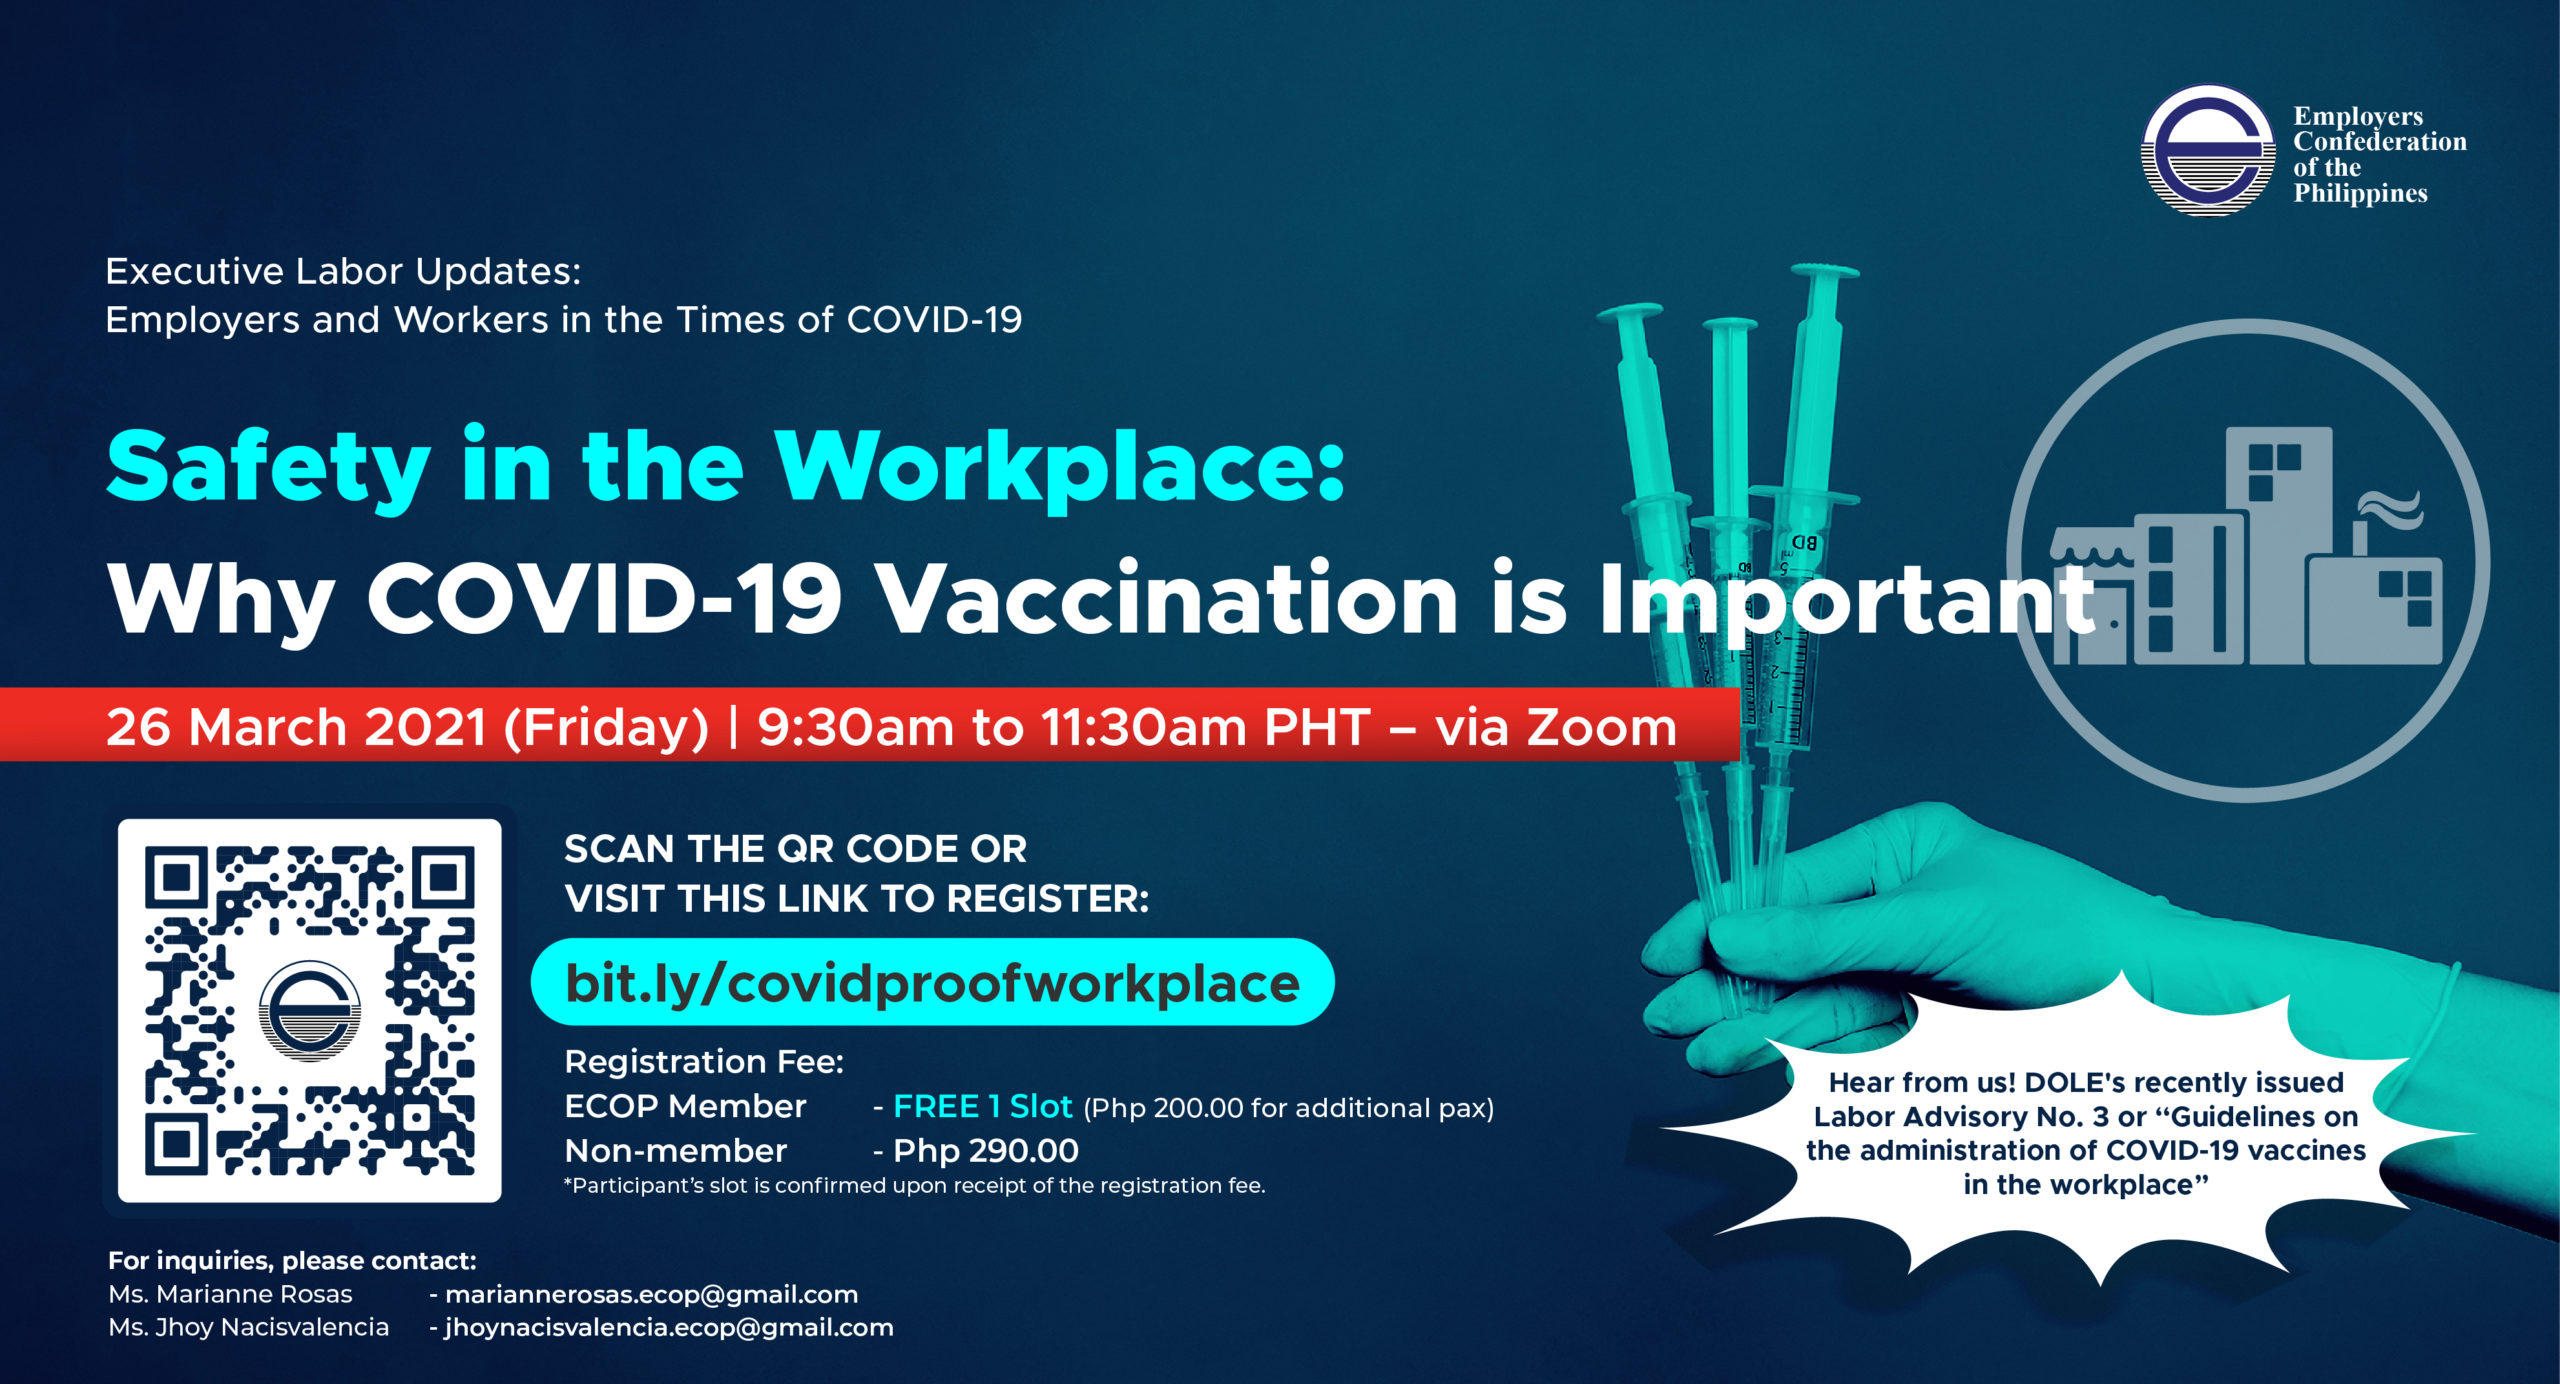 Safety in the Workplace: Why COVID-19 Vaccination is Important